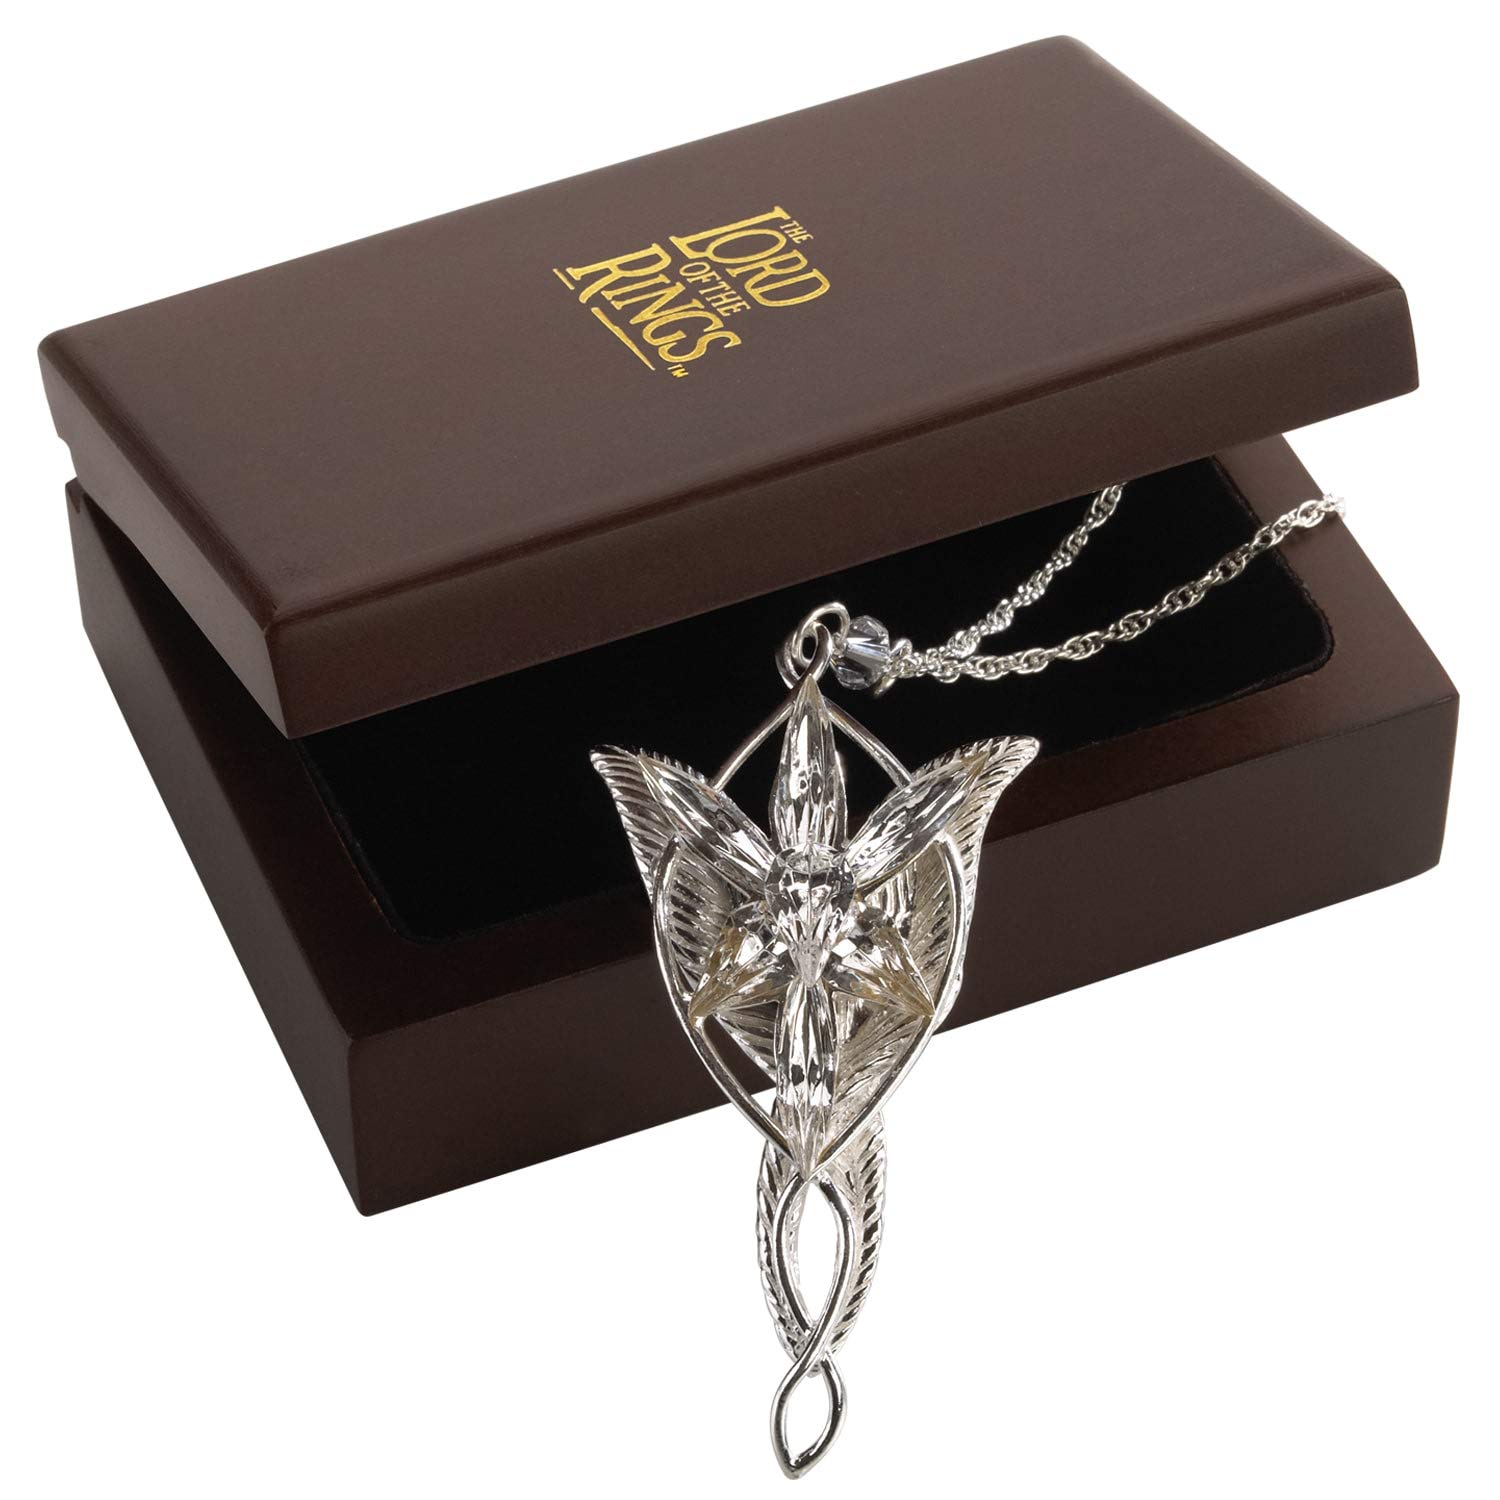 Arwen Evenstar Pendant - Lord of the Rings